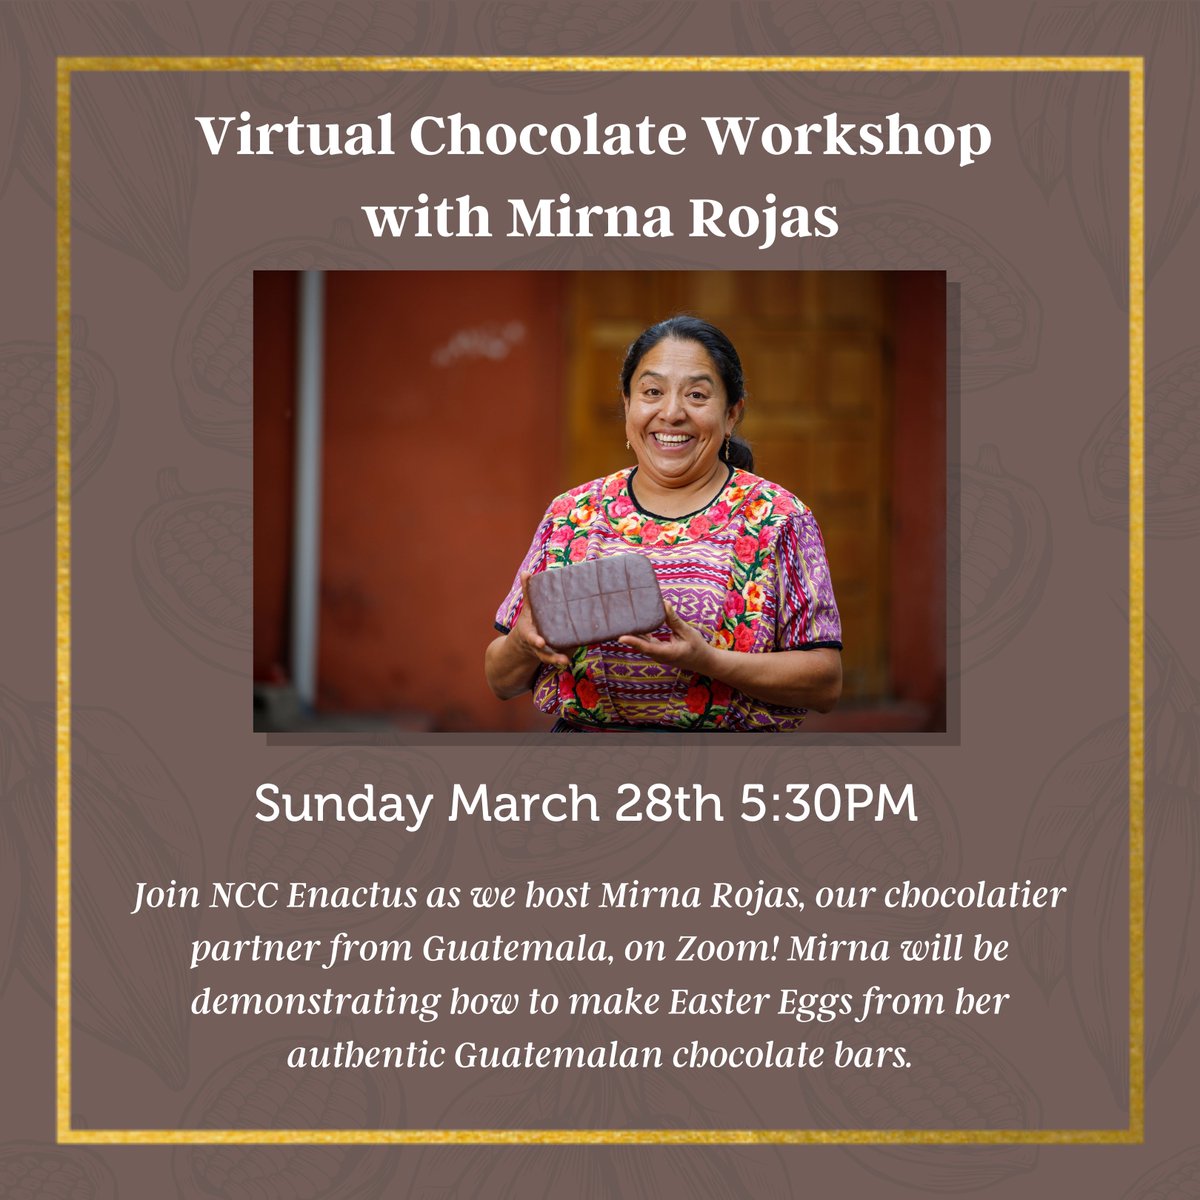 Dyeing eggs for Easter? Wouldn't it be fun to make some chocolate eggs too? Enactus partner and indigenous chocolatier Mirna Rojas will offer an online chocolate workshop! The focus will be on hollow Easter eggs and other holiday treats.